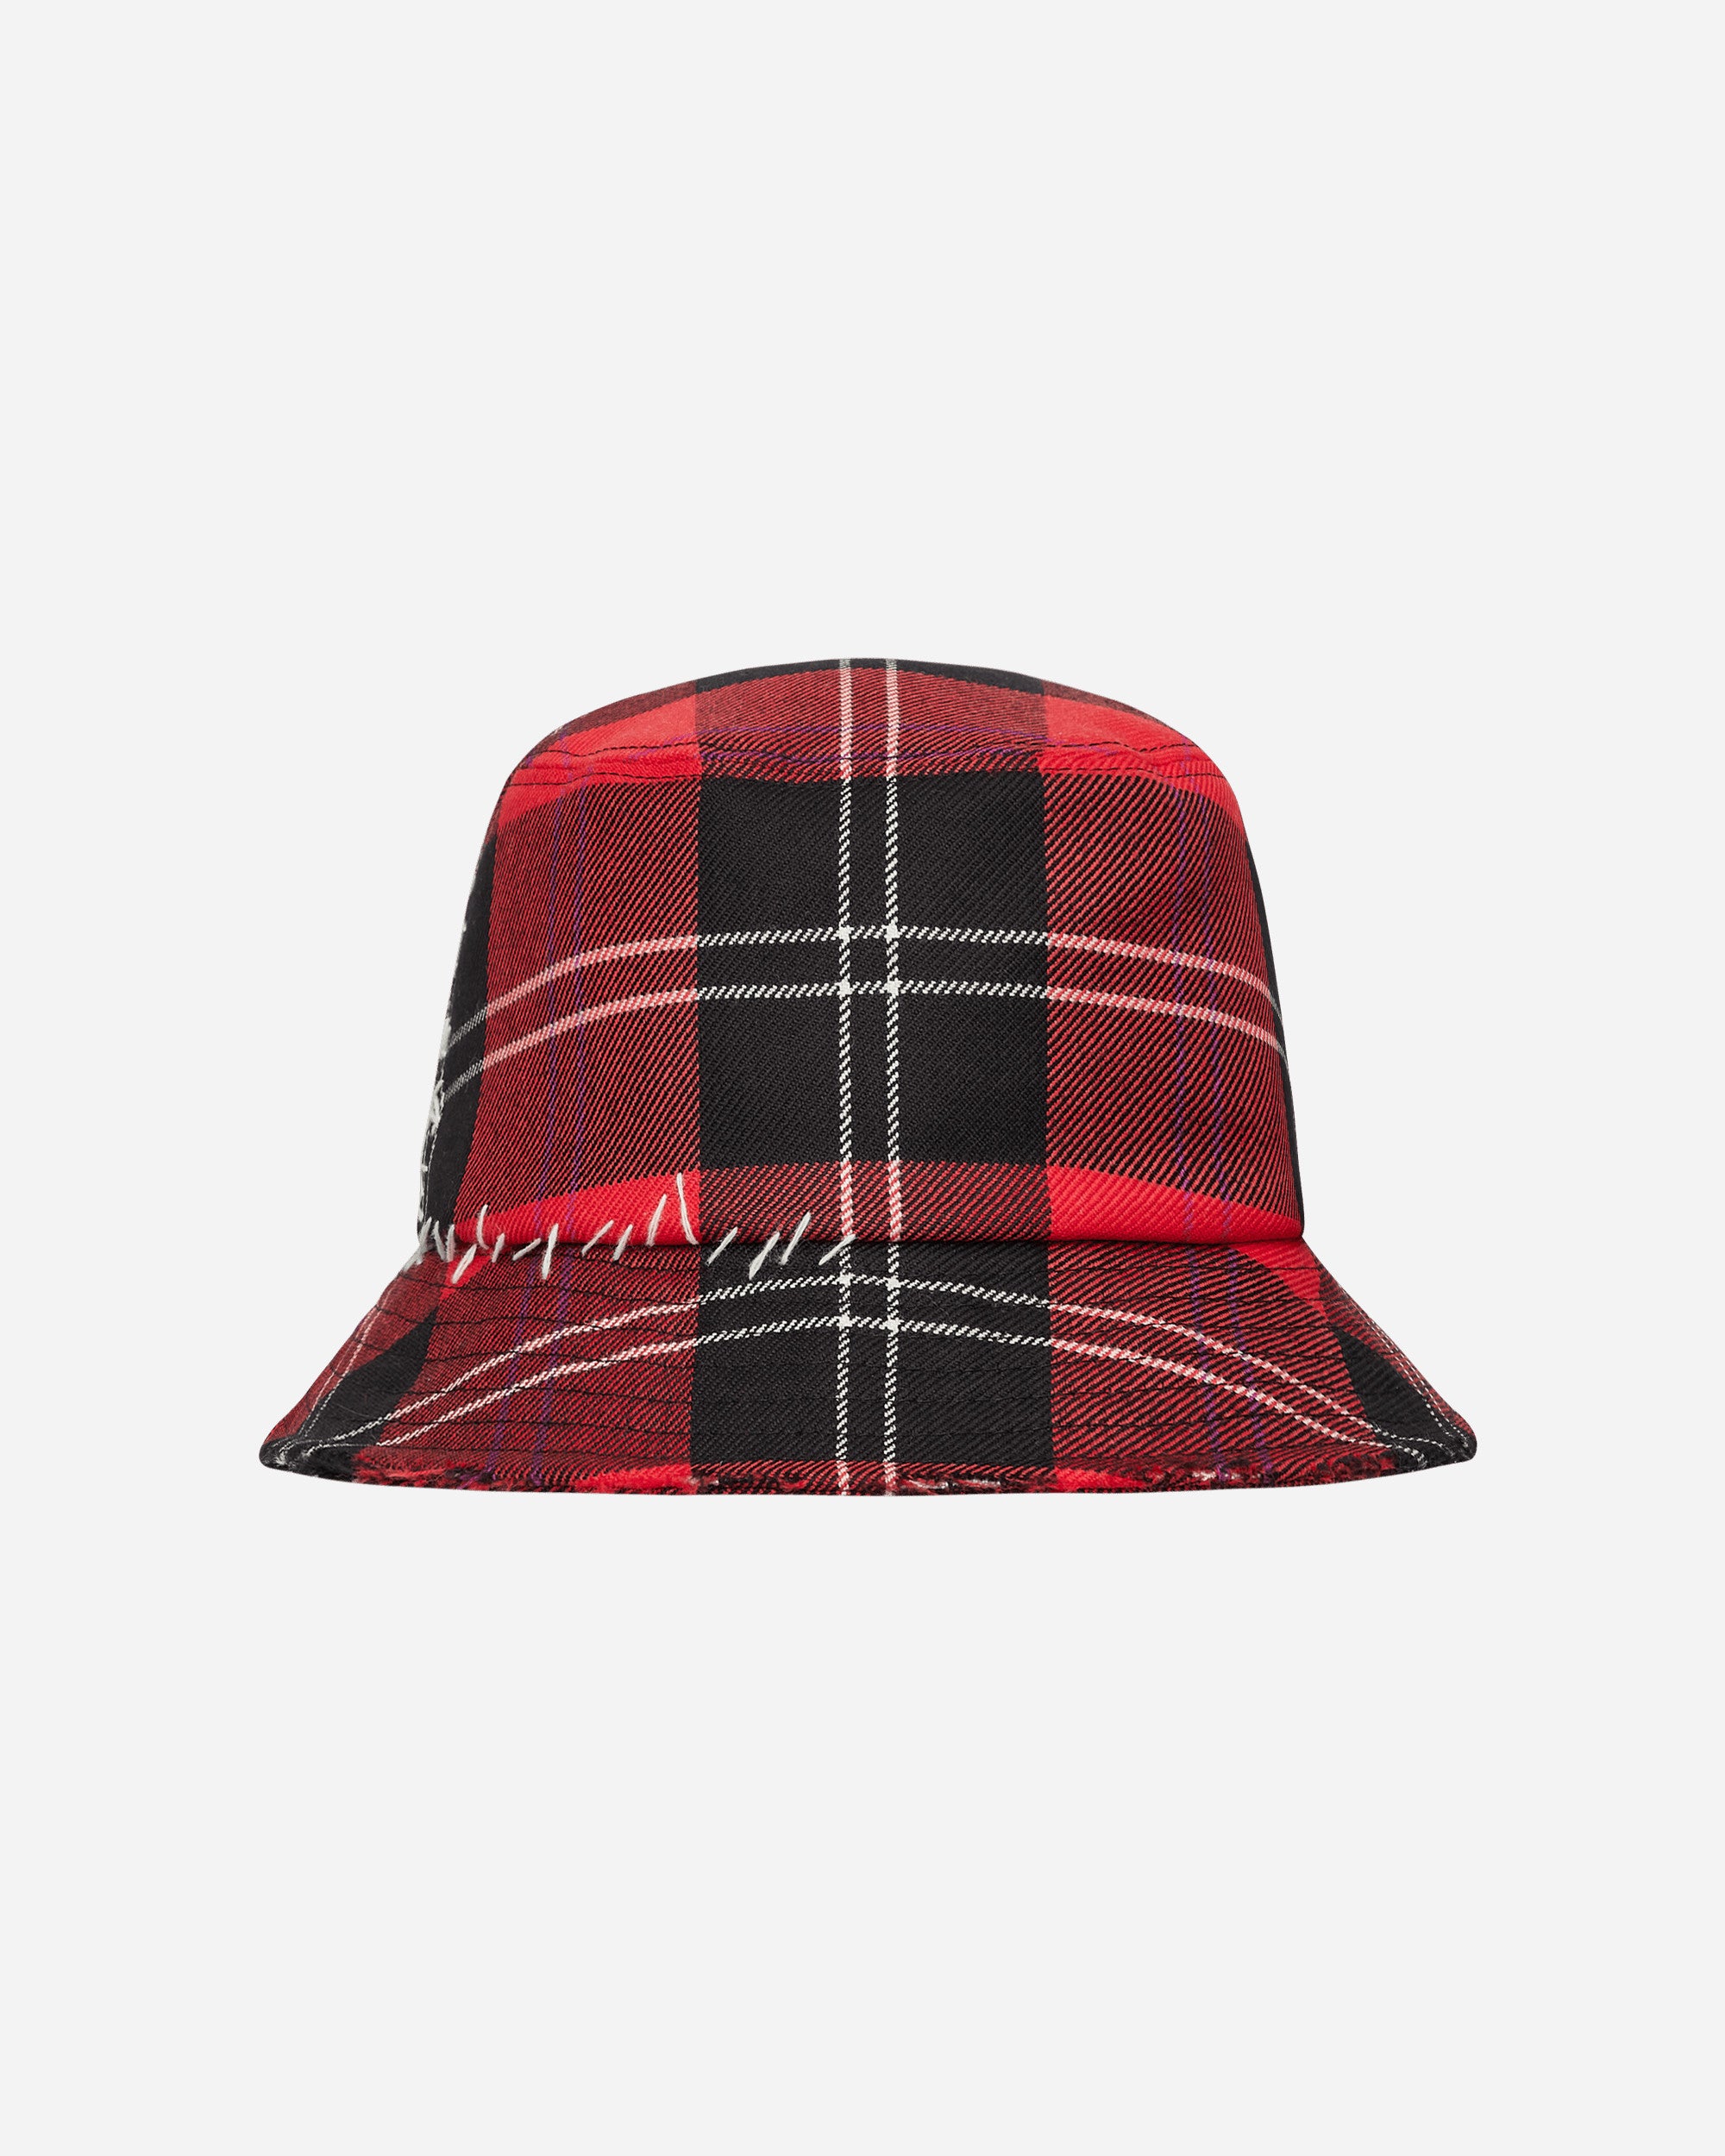 Marni Bucket Hat Lacquer Hats Bucket CLZC0088SY FWR64